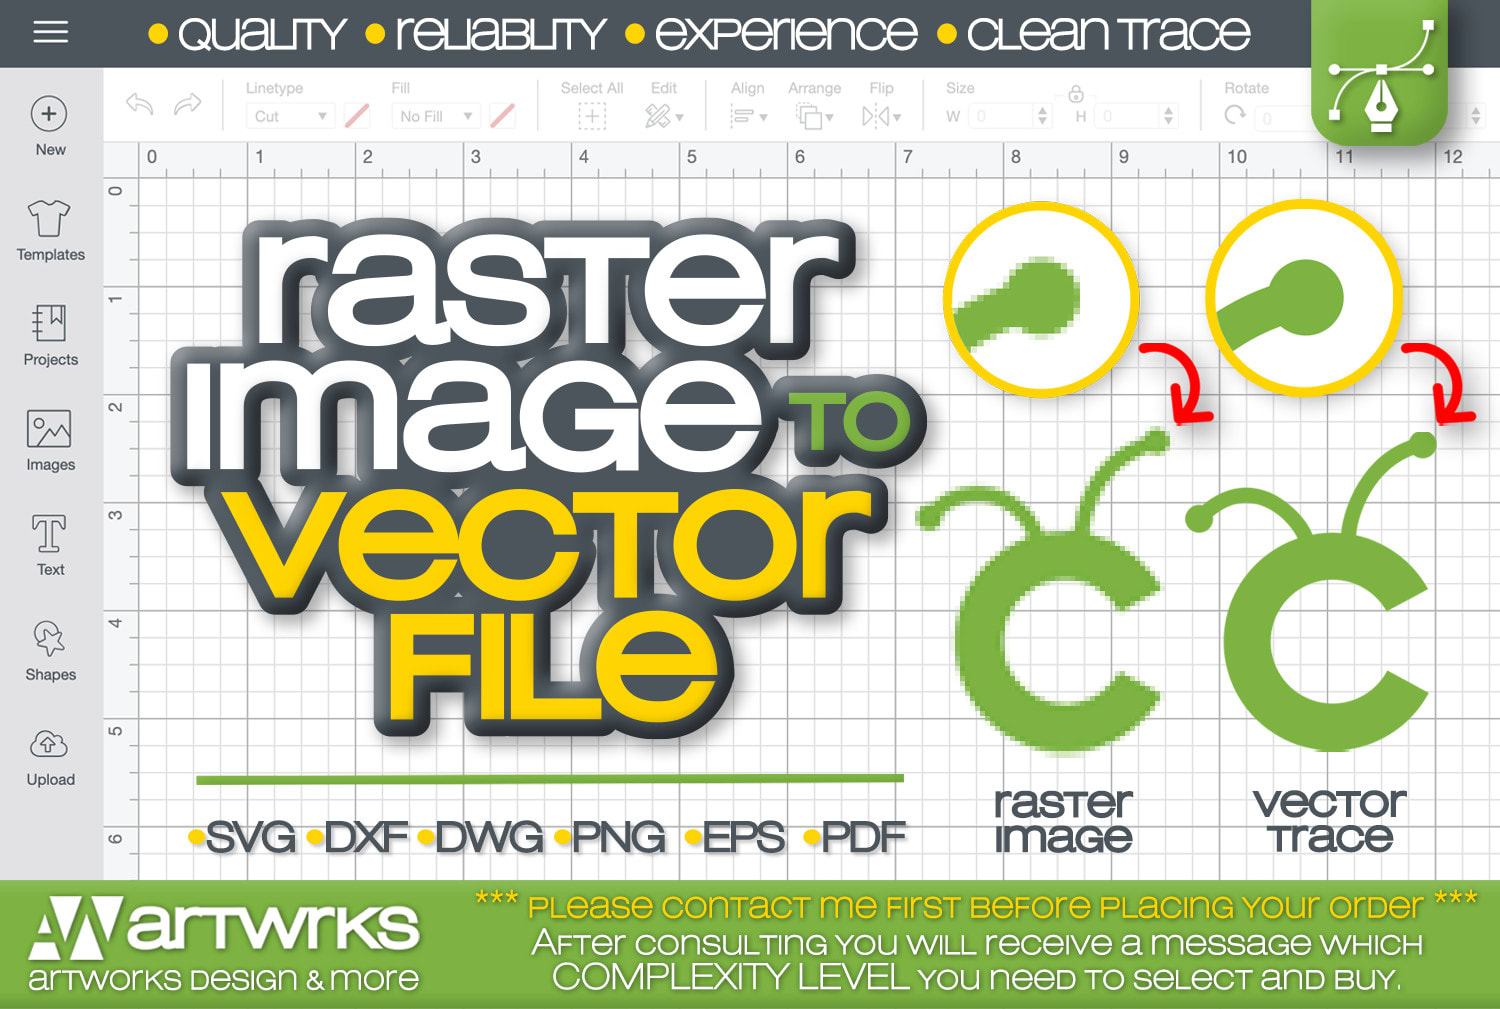 Download Convert A Raster Image Logo To Vector Svg Files For Cricut Vector Files By Luiguidlt Fiverr